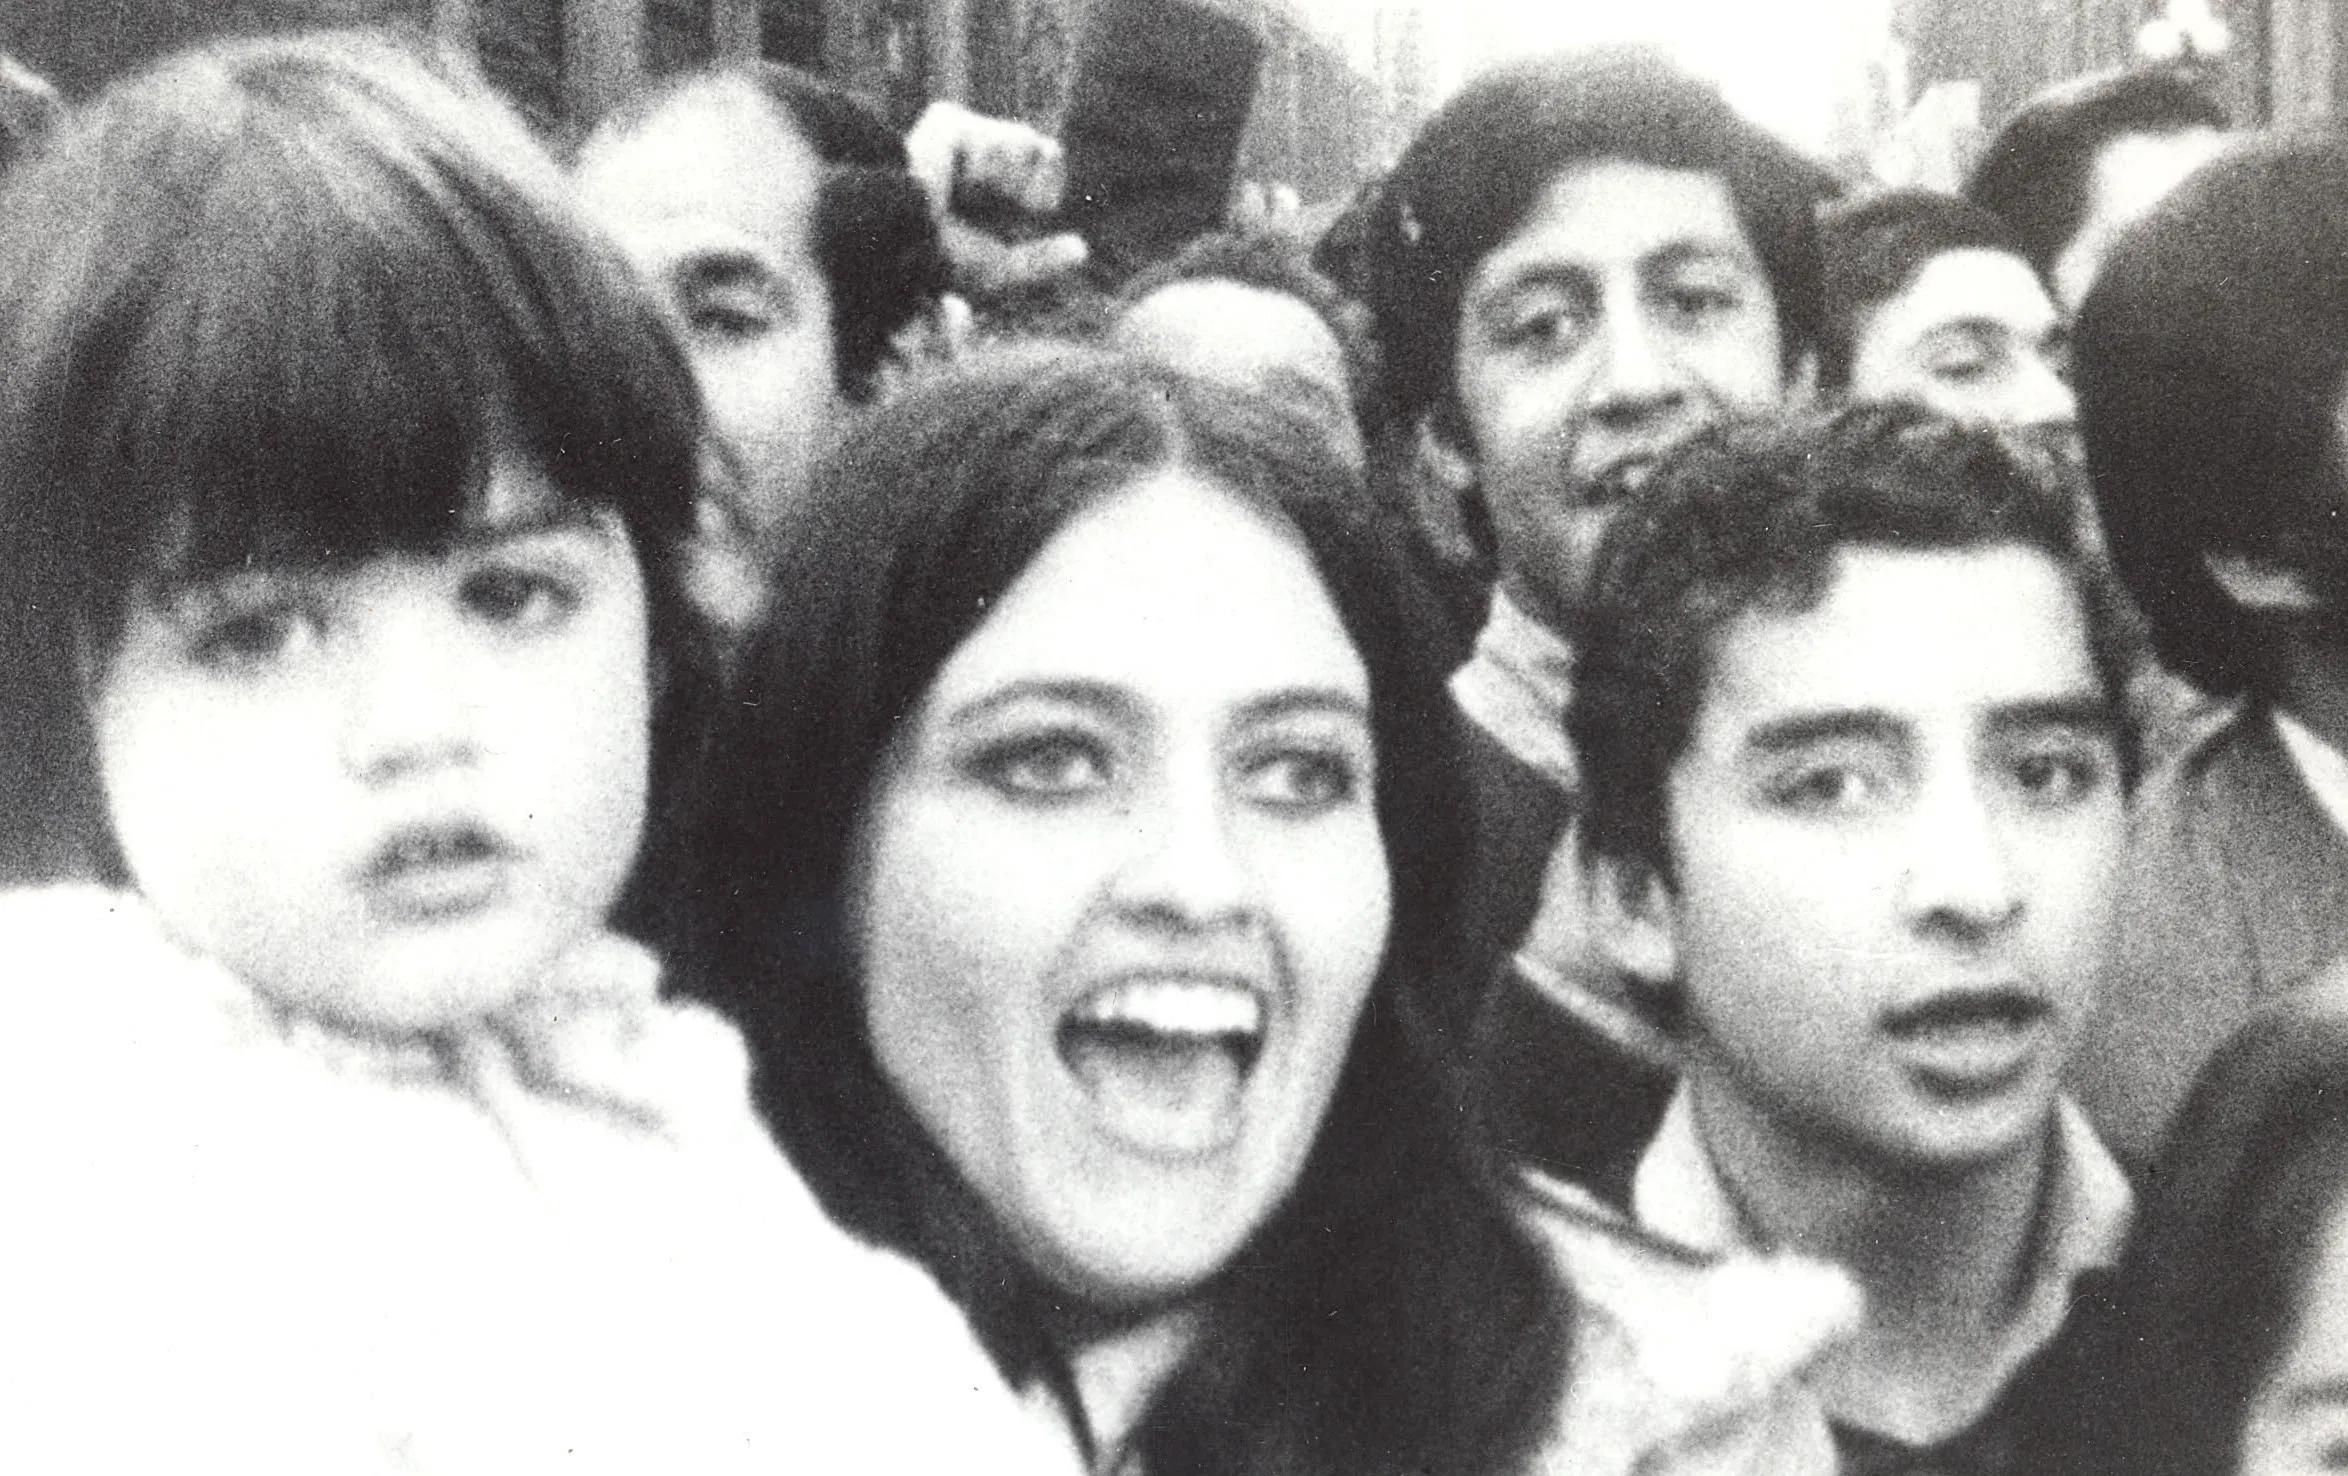 Focus on the masses: a throng of people participate in a demonstration in support of Allende in "The Battle of Chile" / Photo courtesy of Icarus Films.